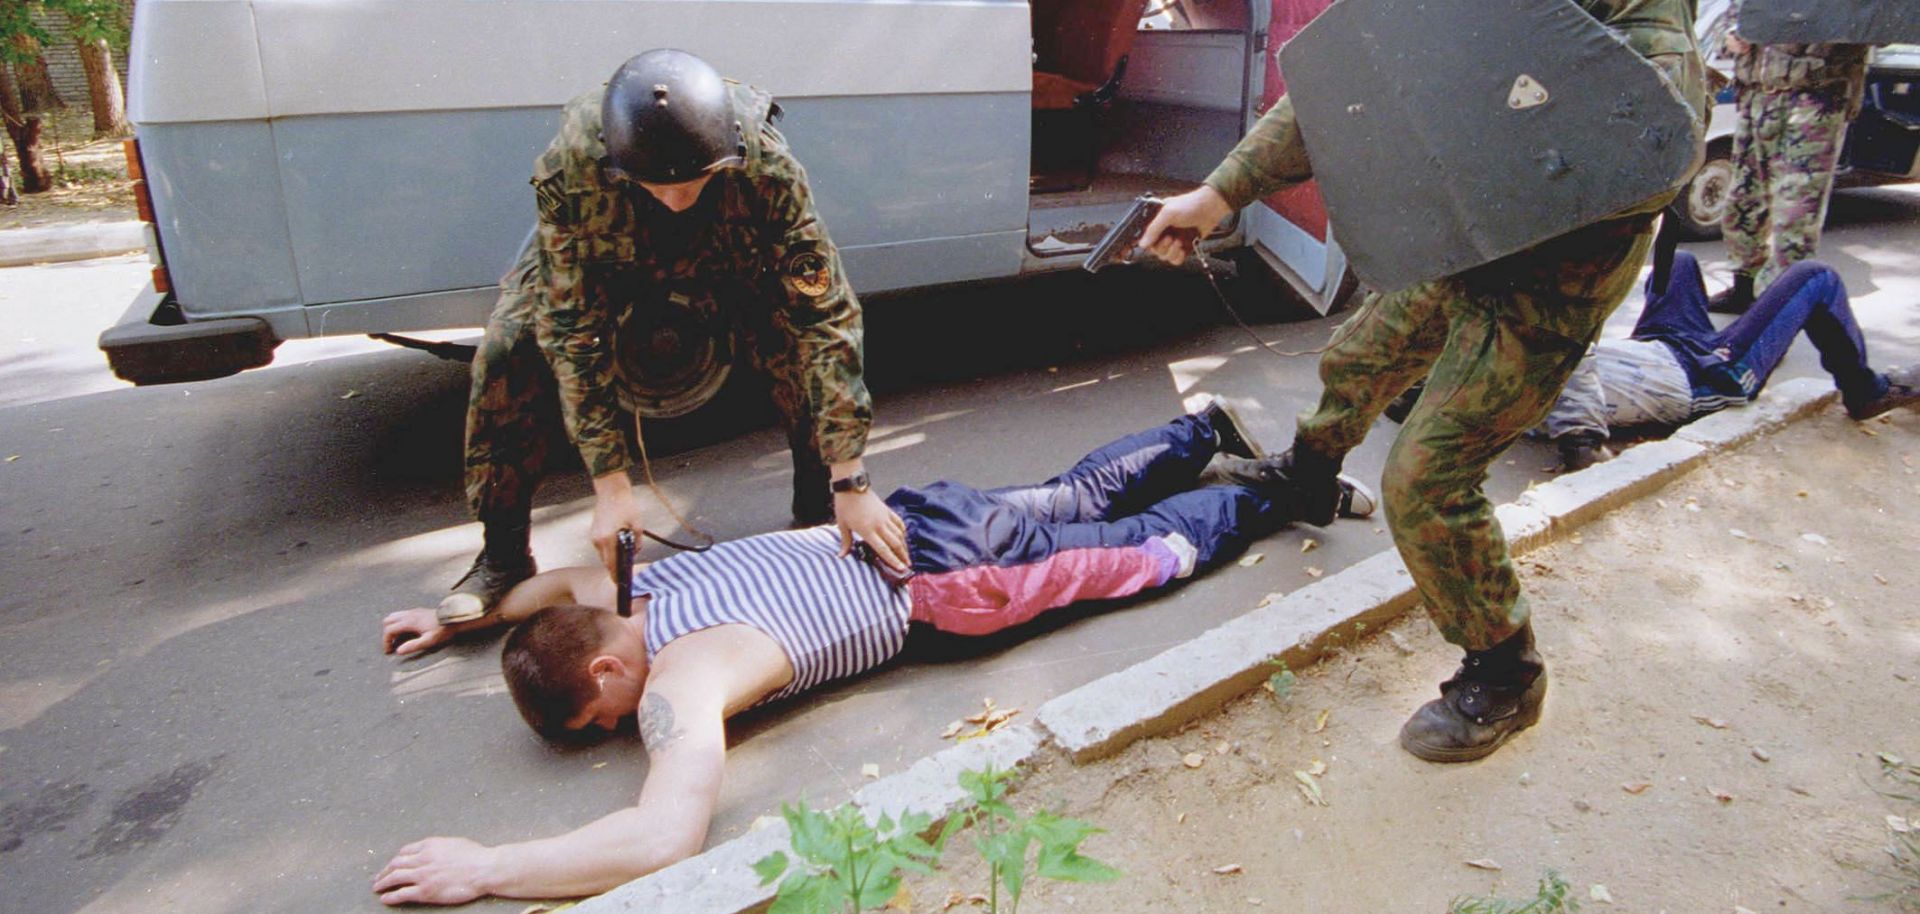 Moscow special forces police arrest a suspected mafia car thief, August 24, 1997.